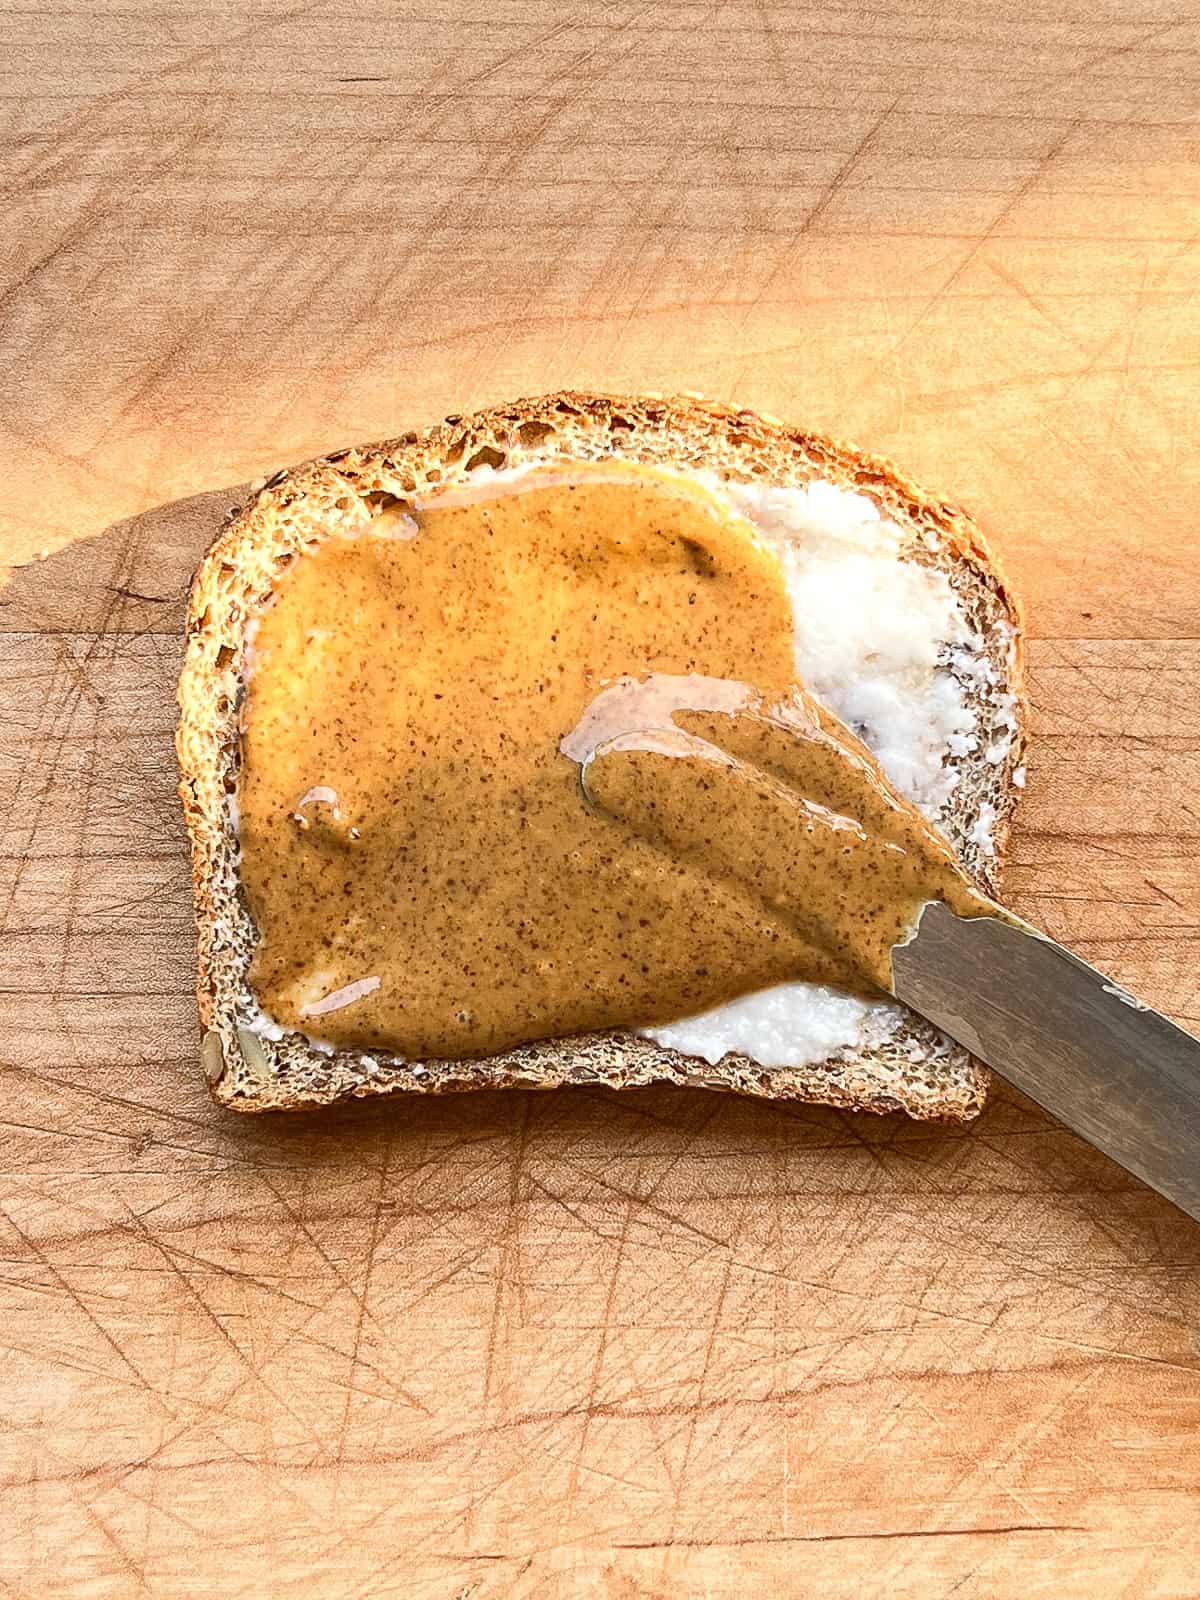 An image of coconut butter and almond butter being spread on toast.